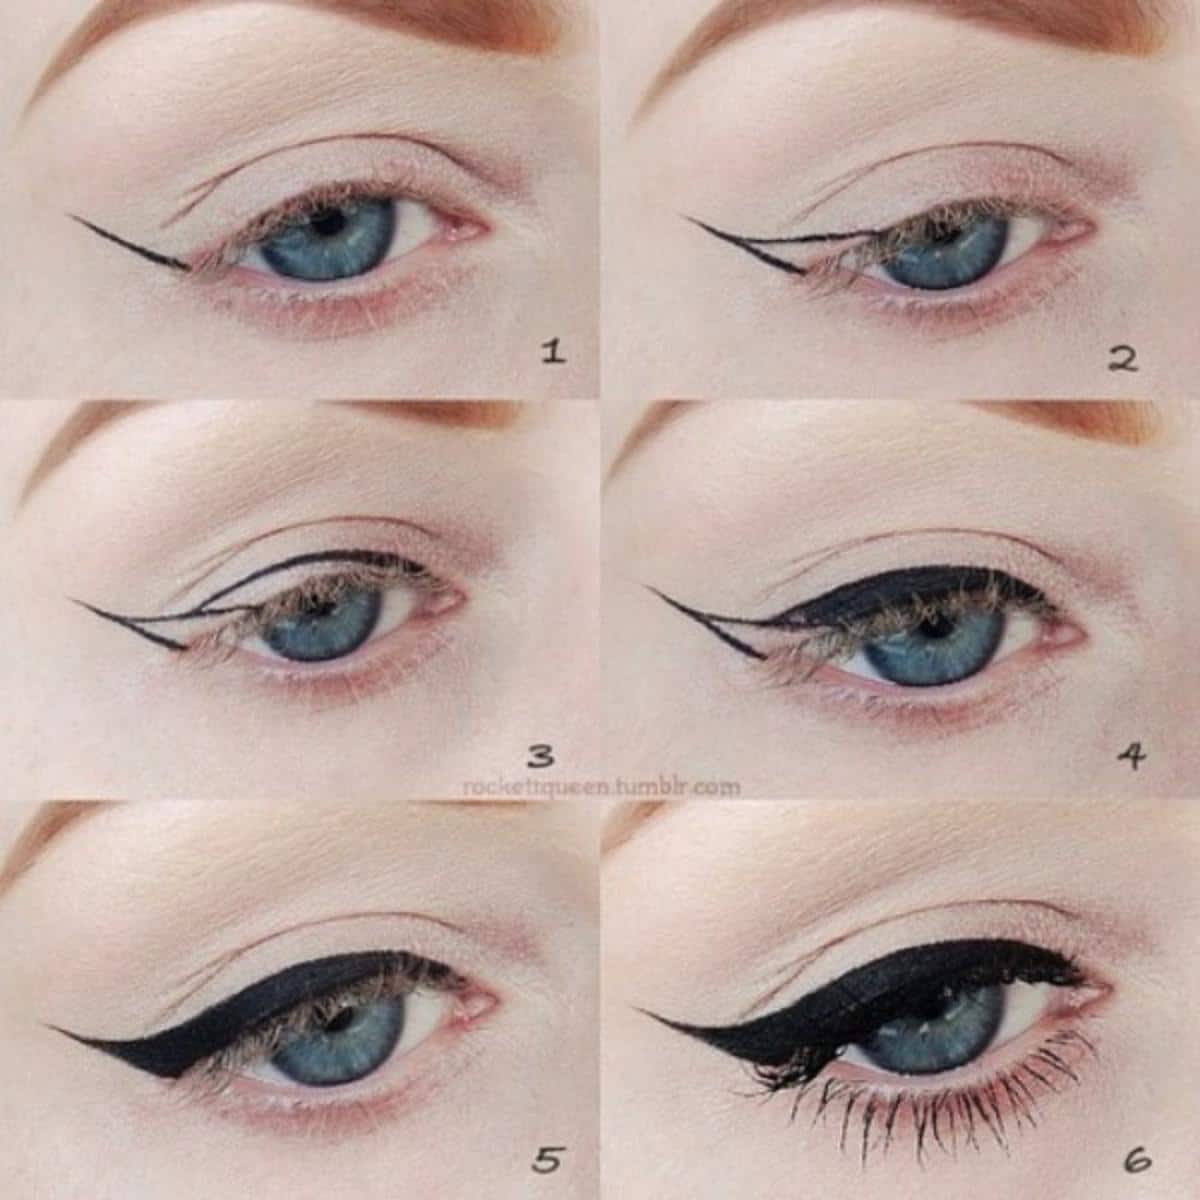 Learn How to Create a Winged Look with Eye Makeup collage.